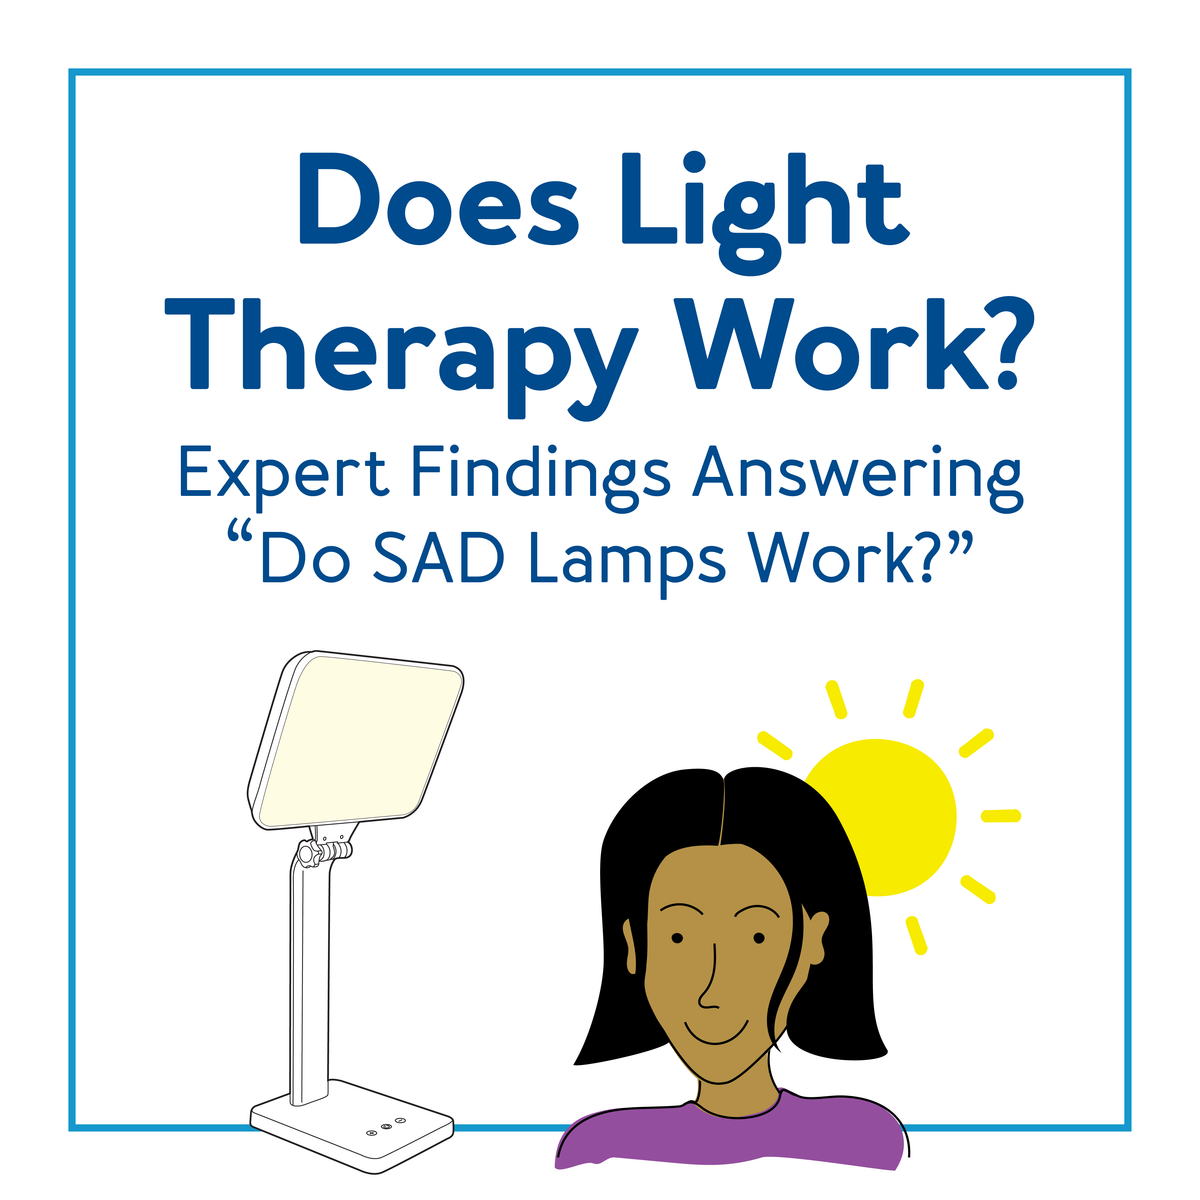 Does Light Therapy Work? - Infographic